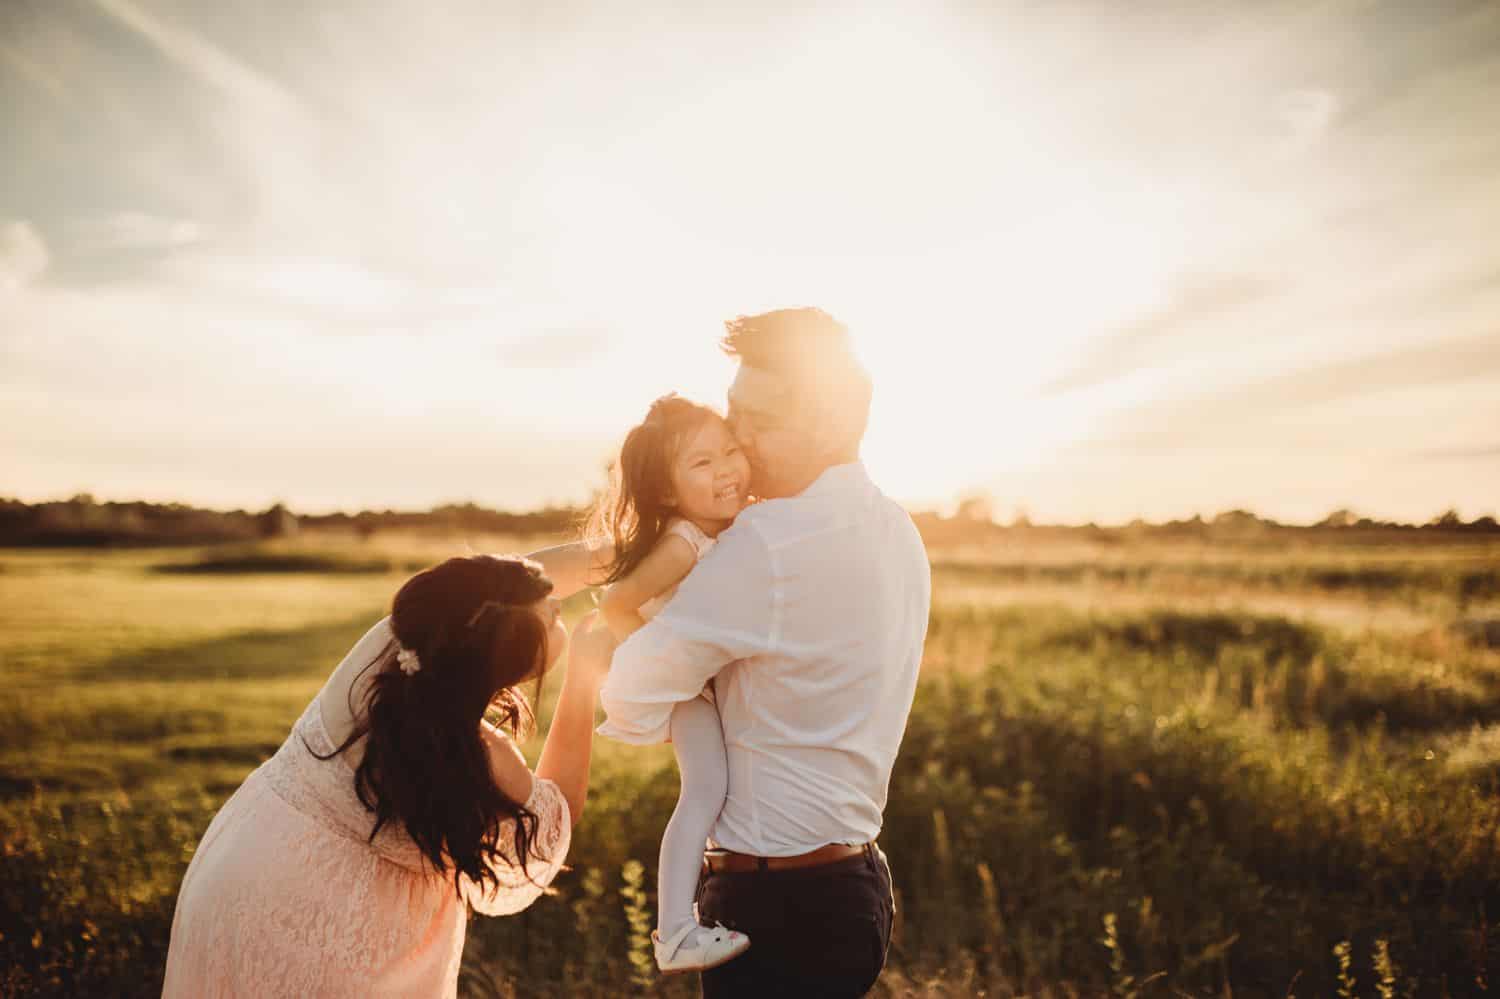 Two parents are surrounded by sun flare as they play with their toddler daughter in a field.